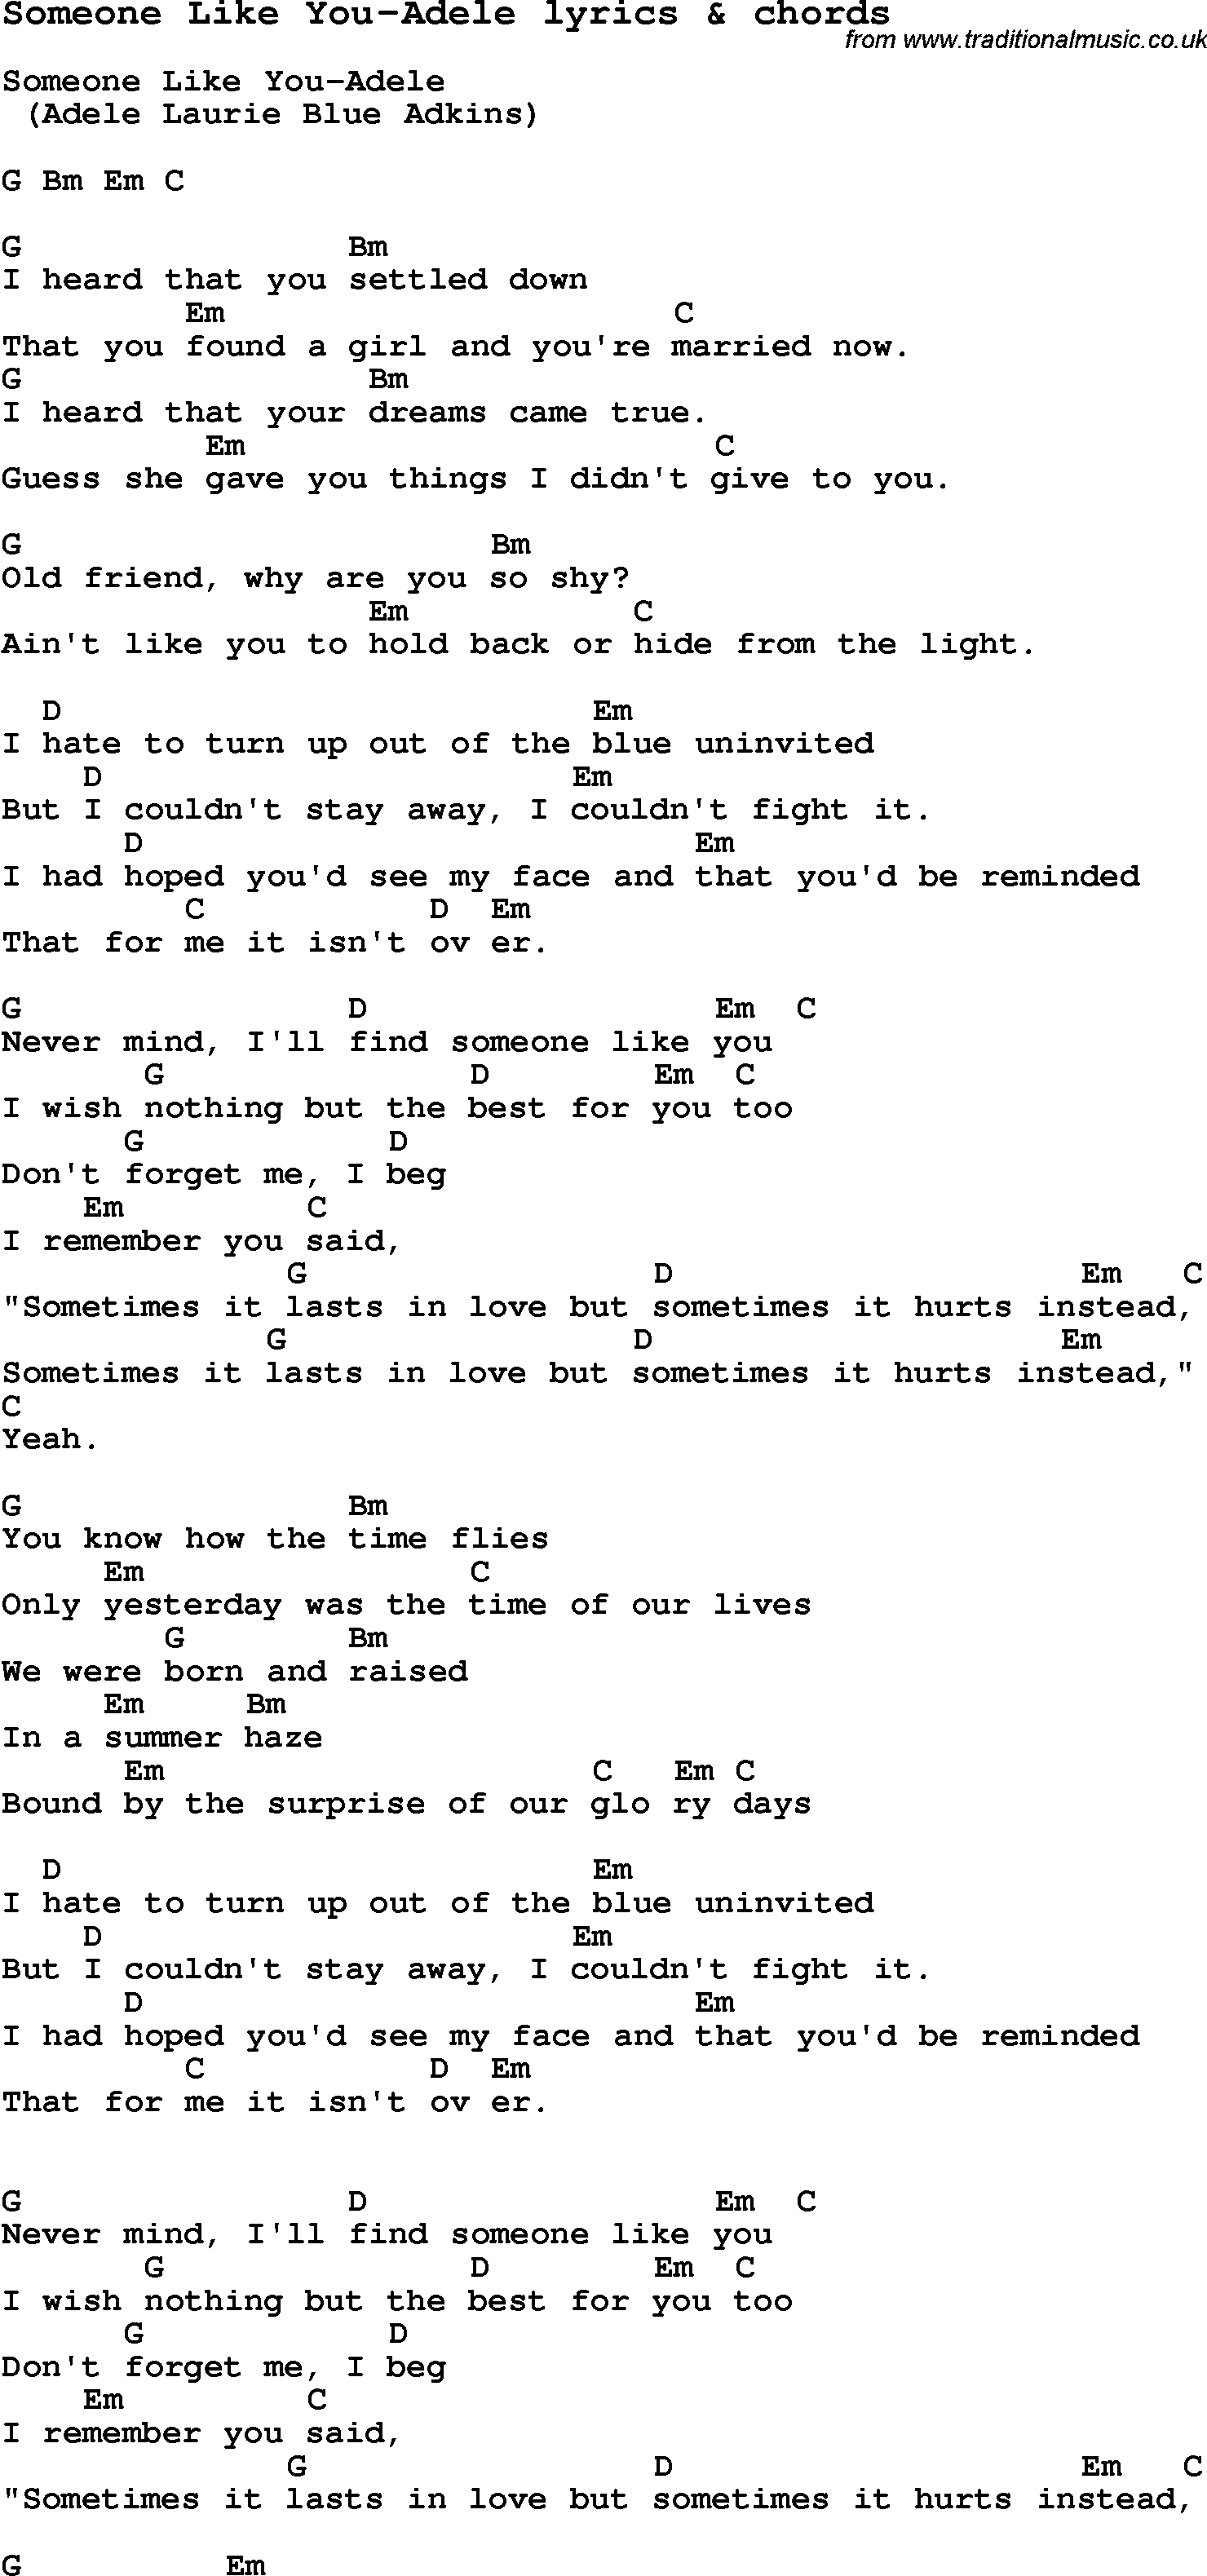 Someone Like You Chords Love Song Lyrics Forsomeone Like You Adele With Chords